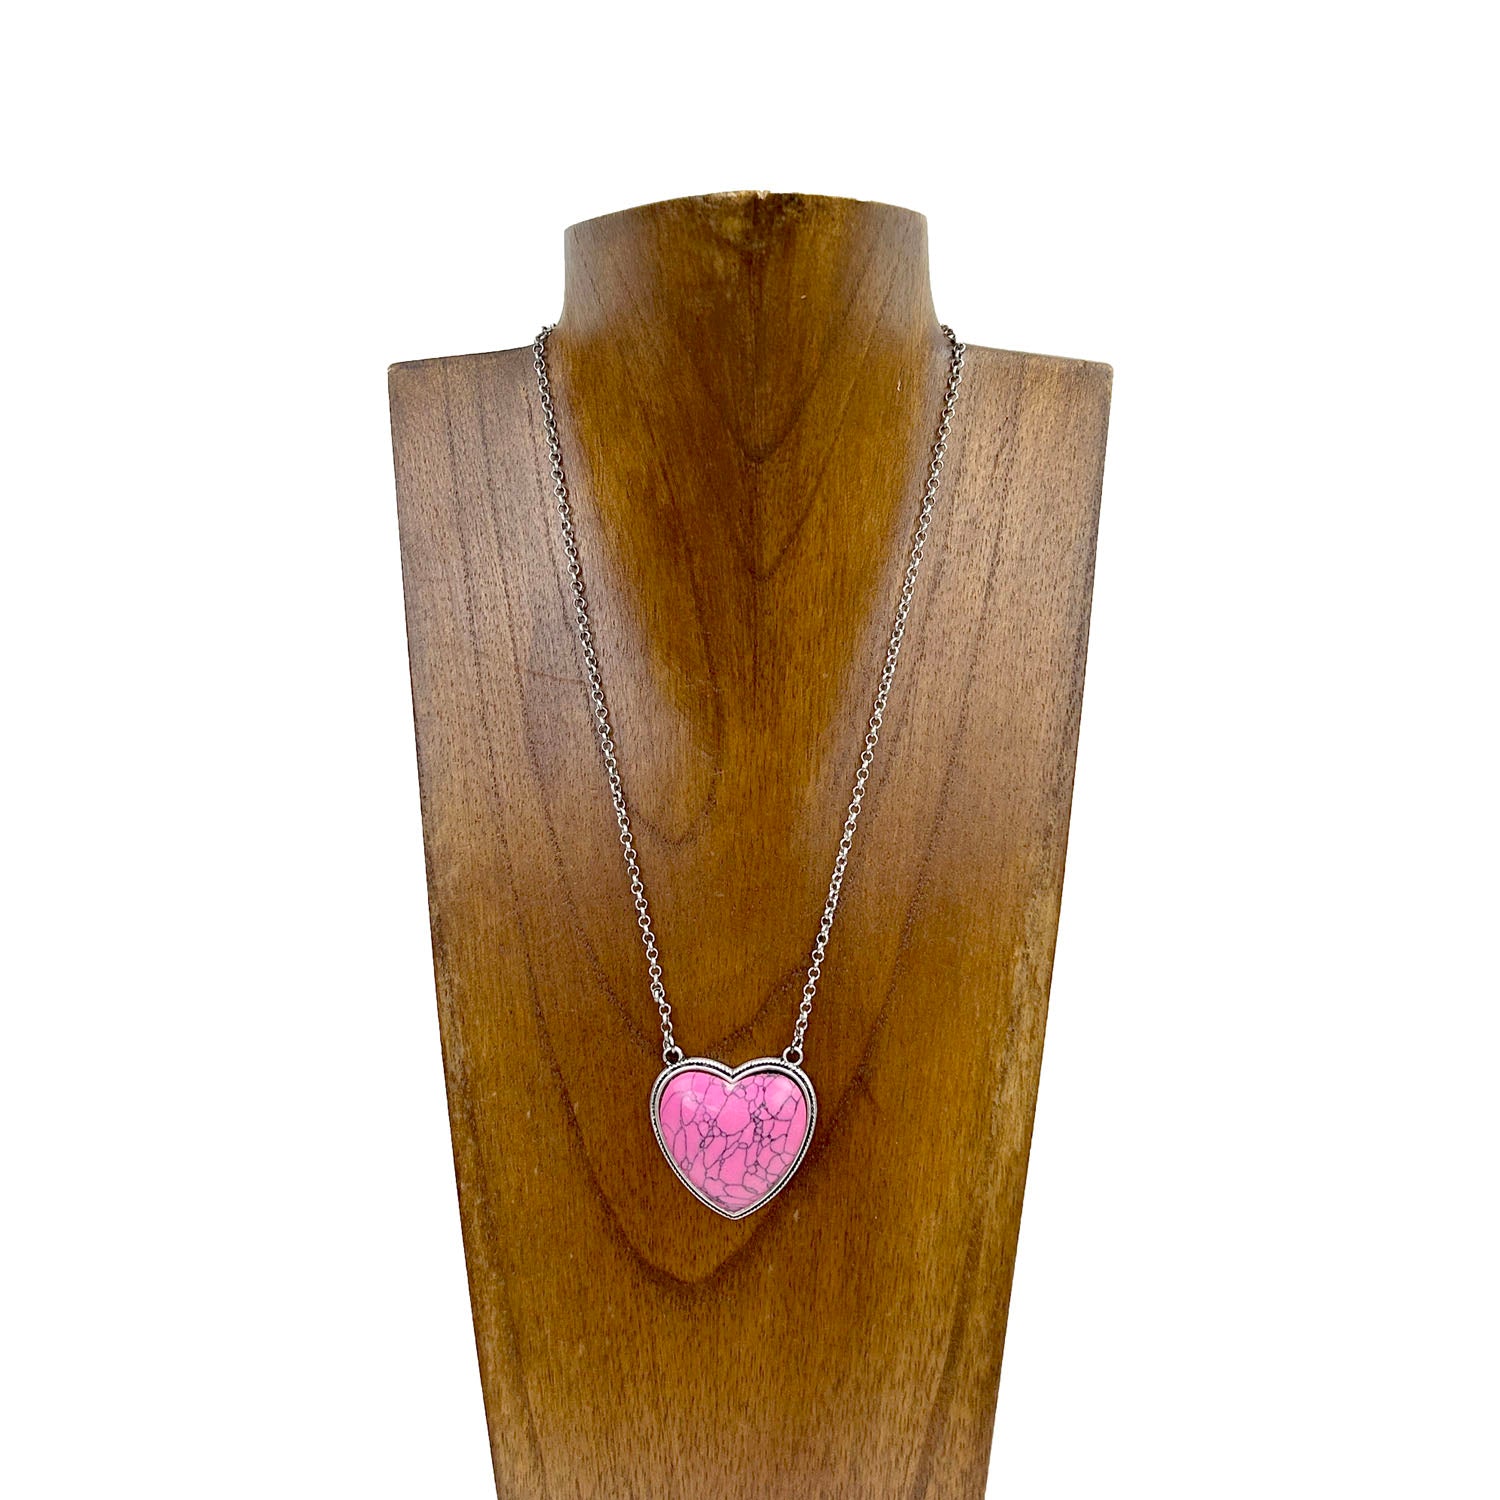 NKY230530-04-HOT PINK      	Silver metal chain with hot pink stone heart Necklace